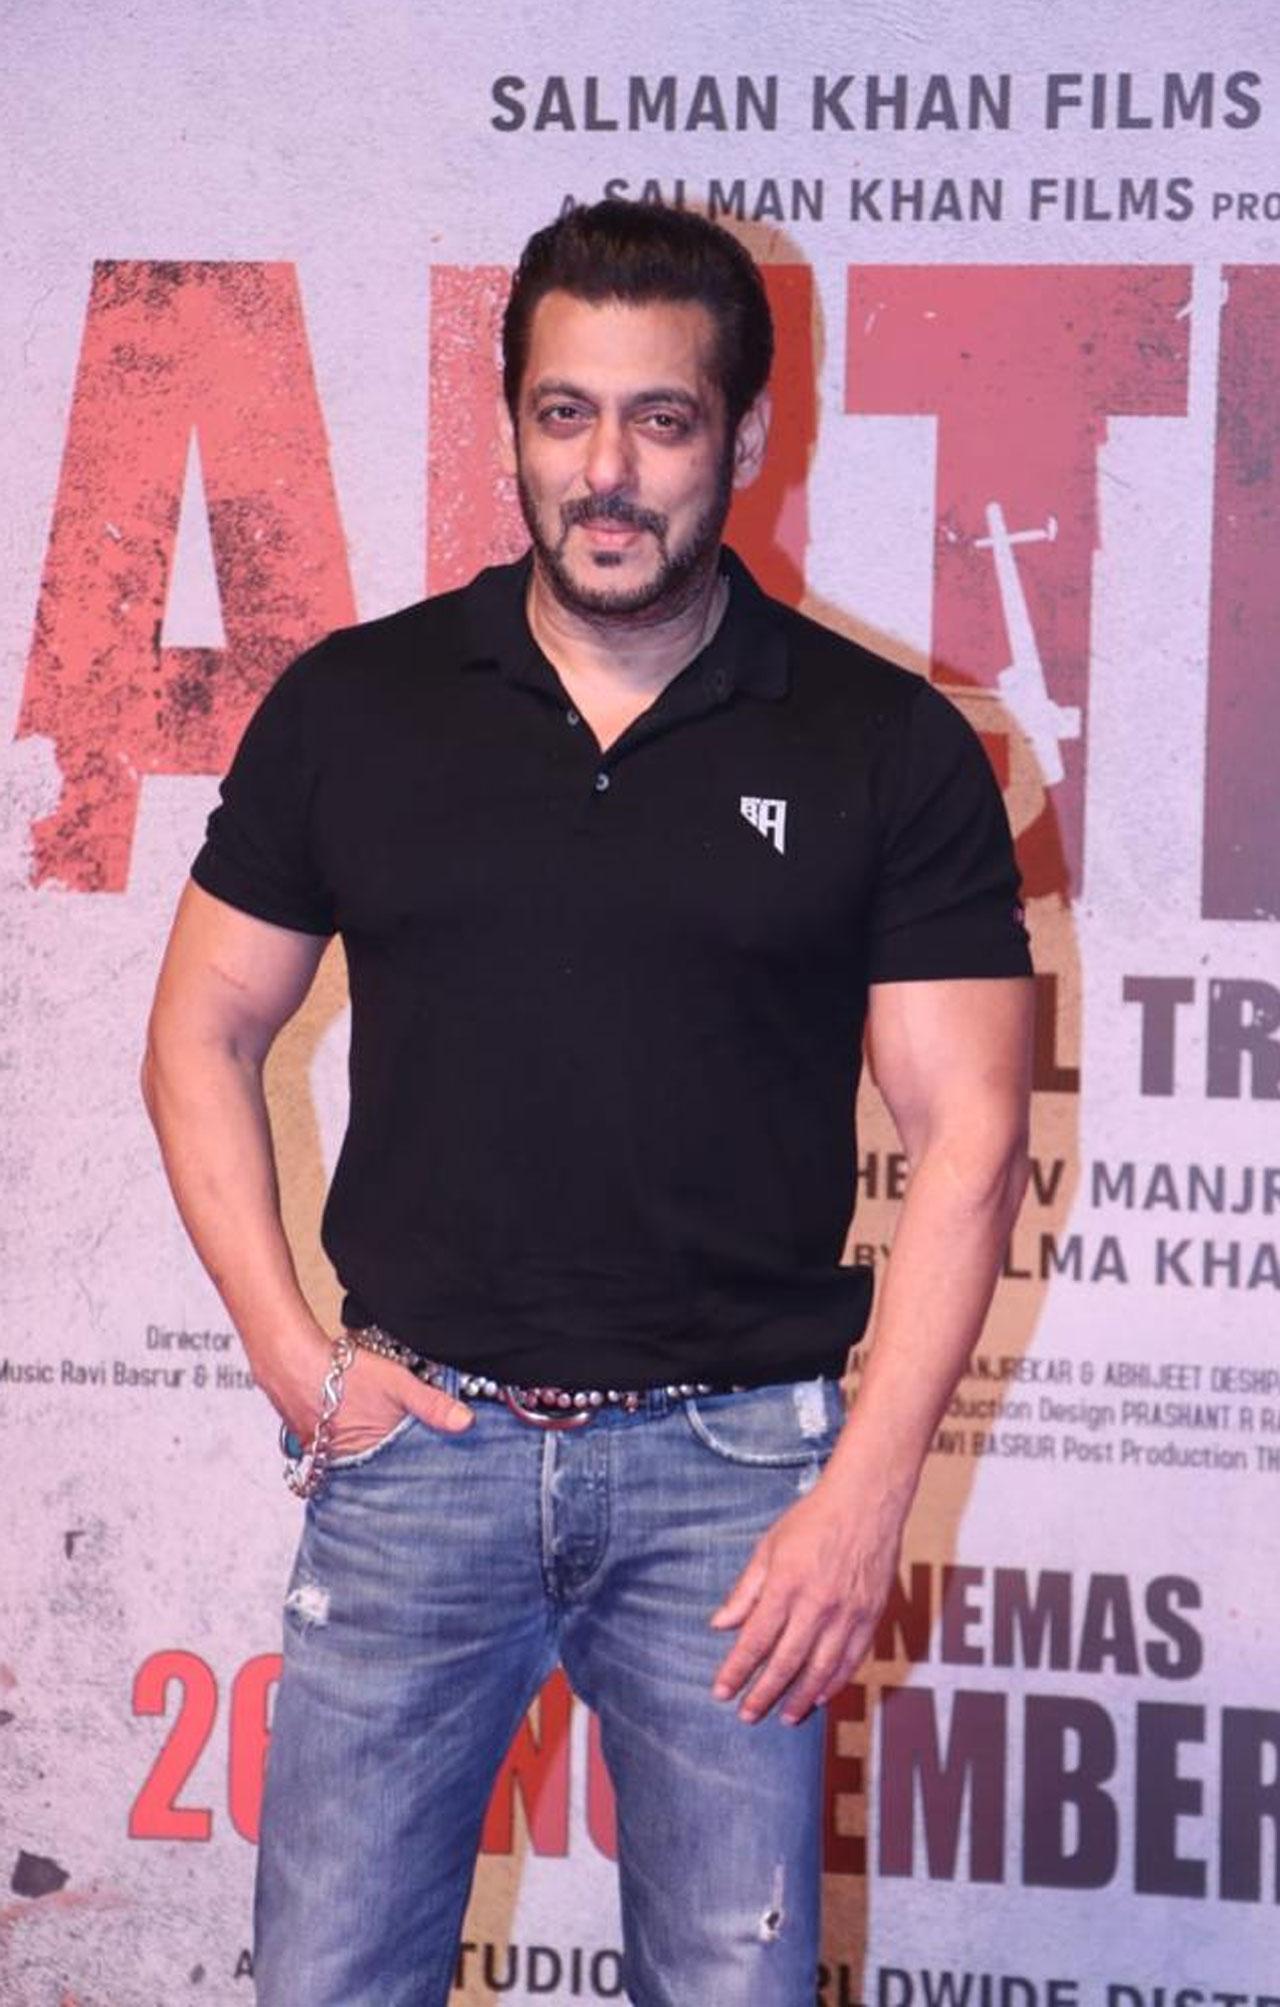 The man himself, Salman Khan, looked his stylish best at the red carpet of his new film. Don’t miss the new logo of Being Human that he flaunts on his black T-Shirt. At the screening, he was also clicked with an elderly lady who came to see the film and give the star her blessings. The video went viral on social media in no time.